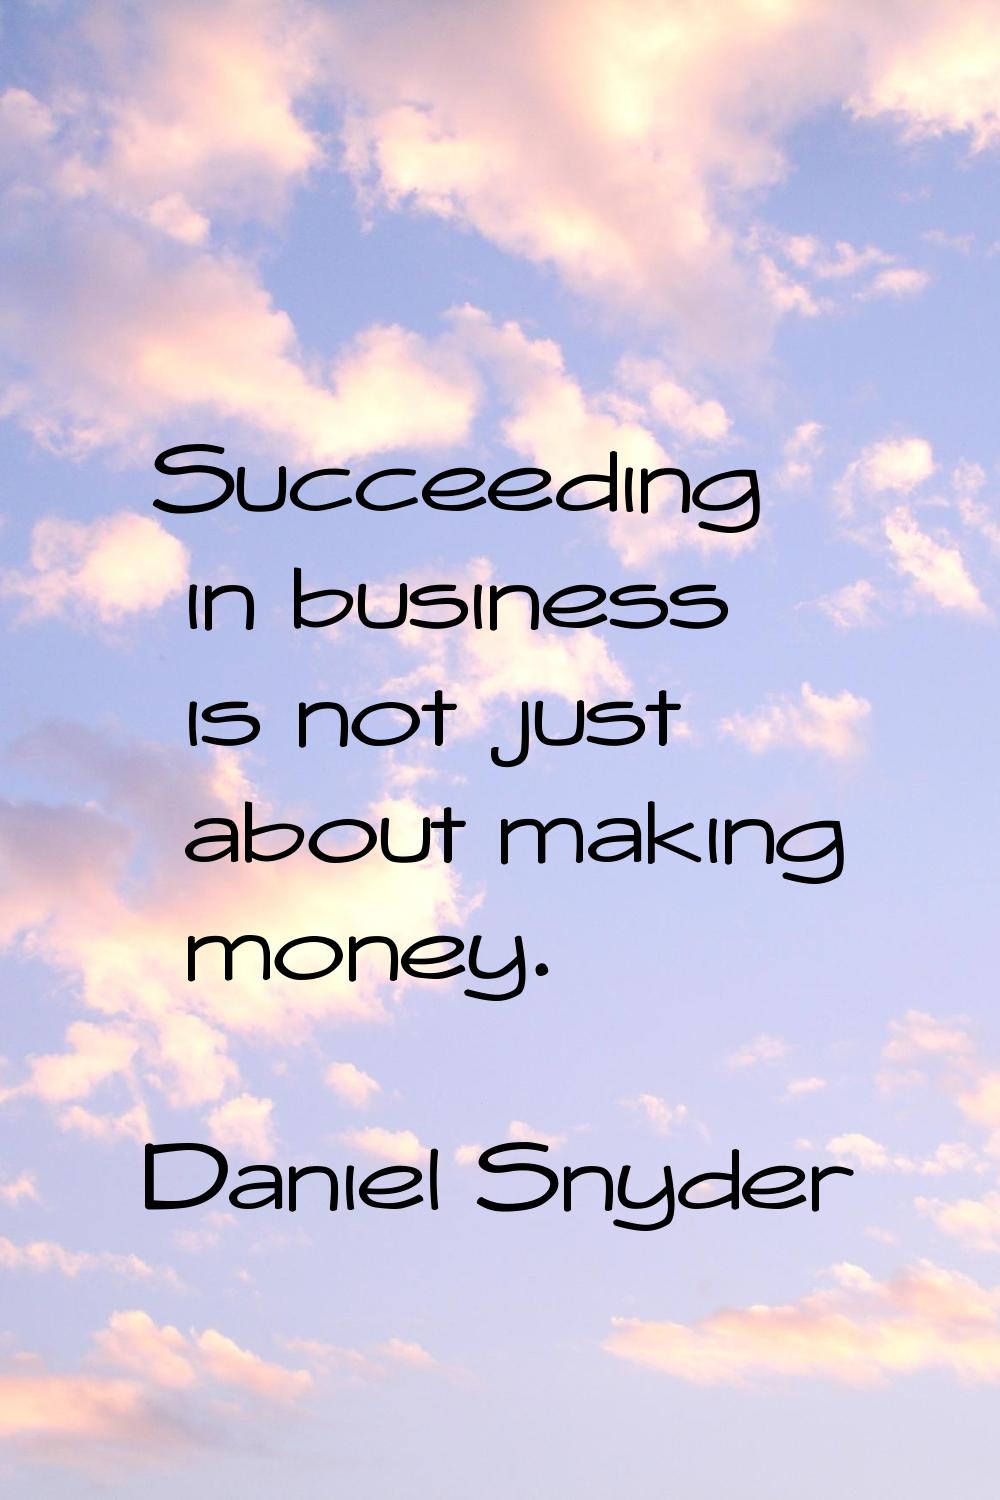 Succeeding in business is not just about making money.